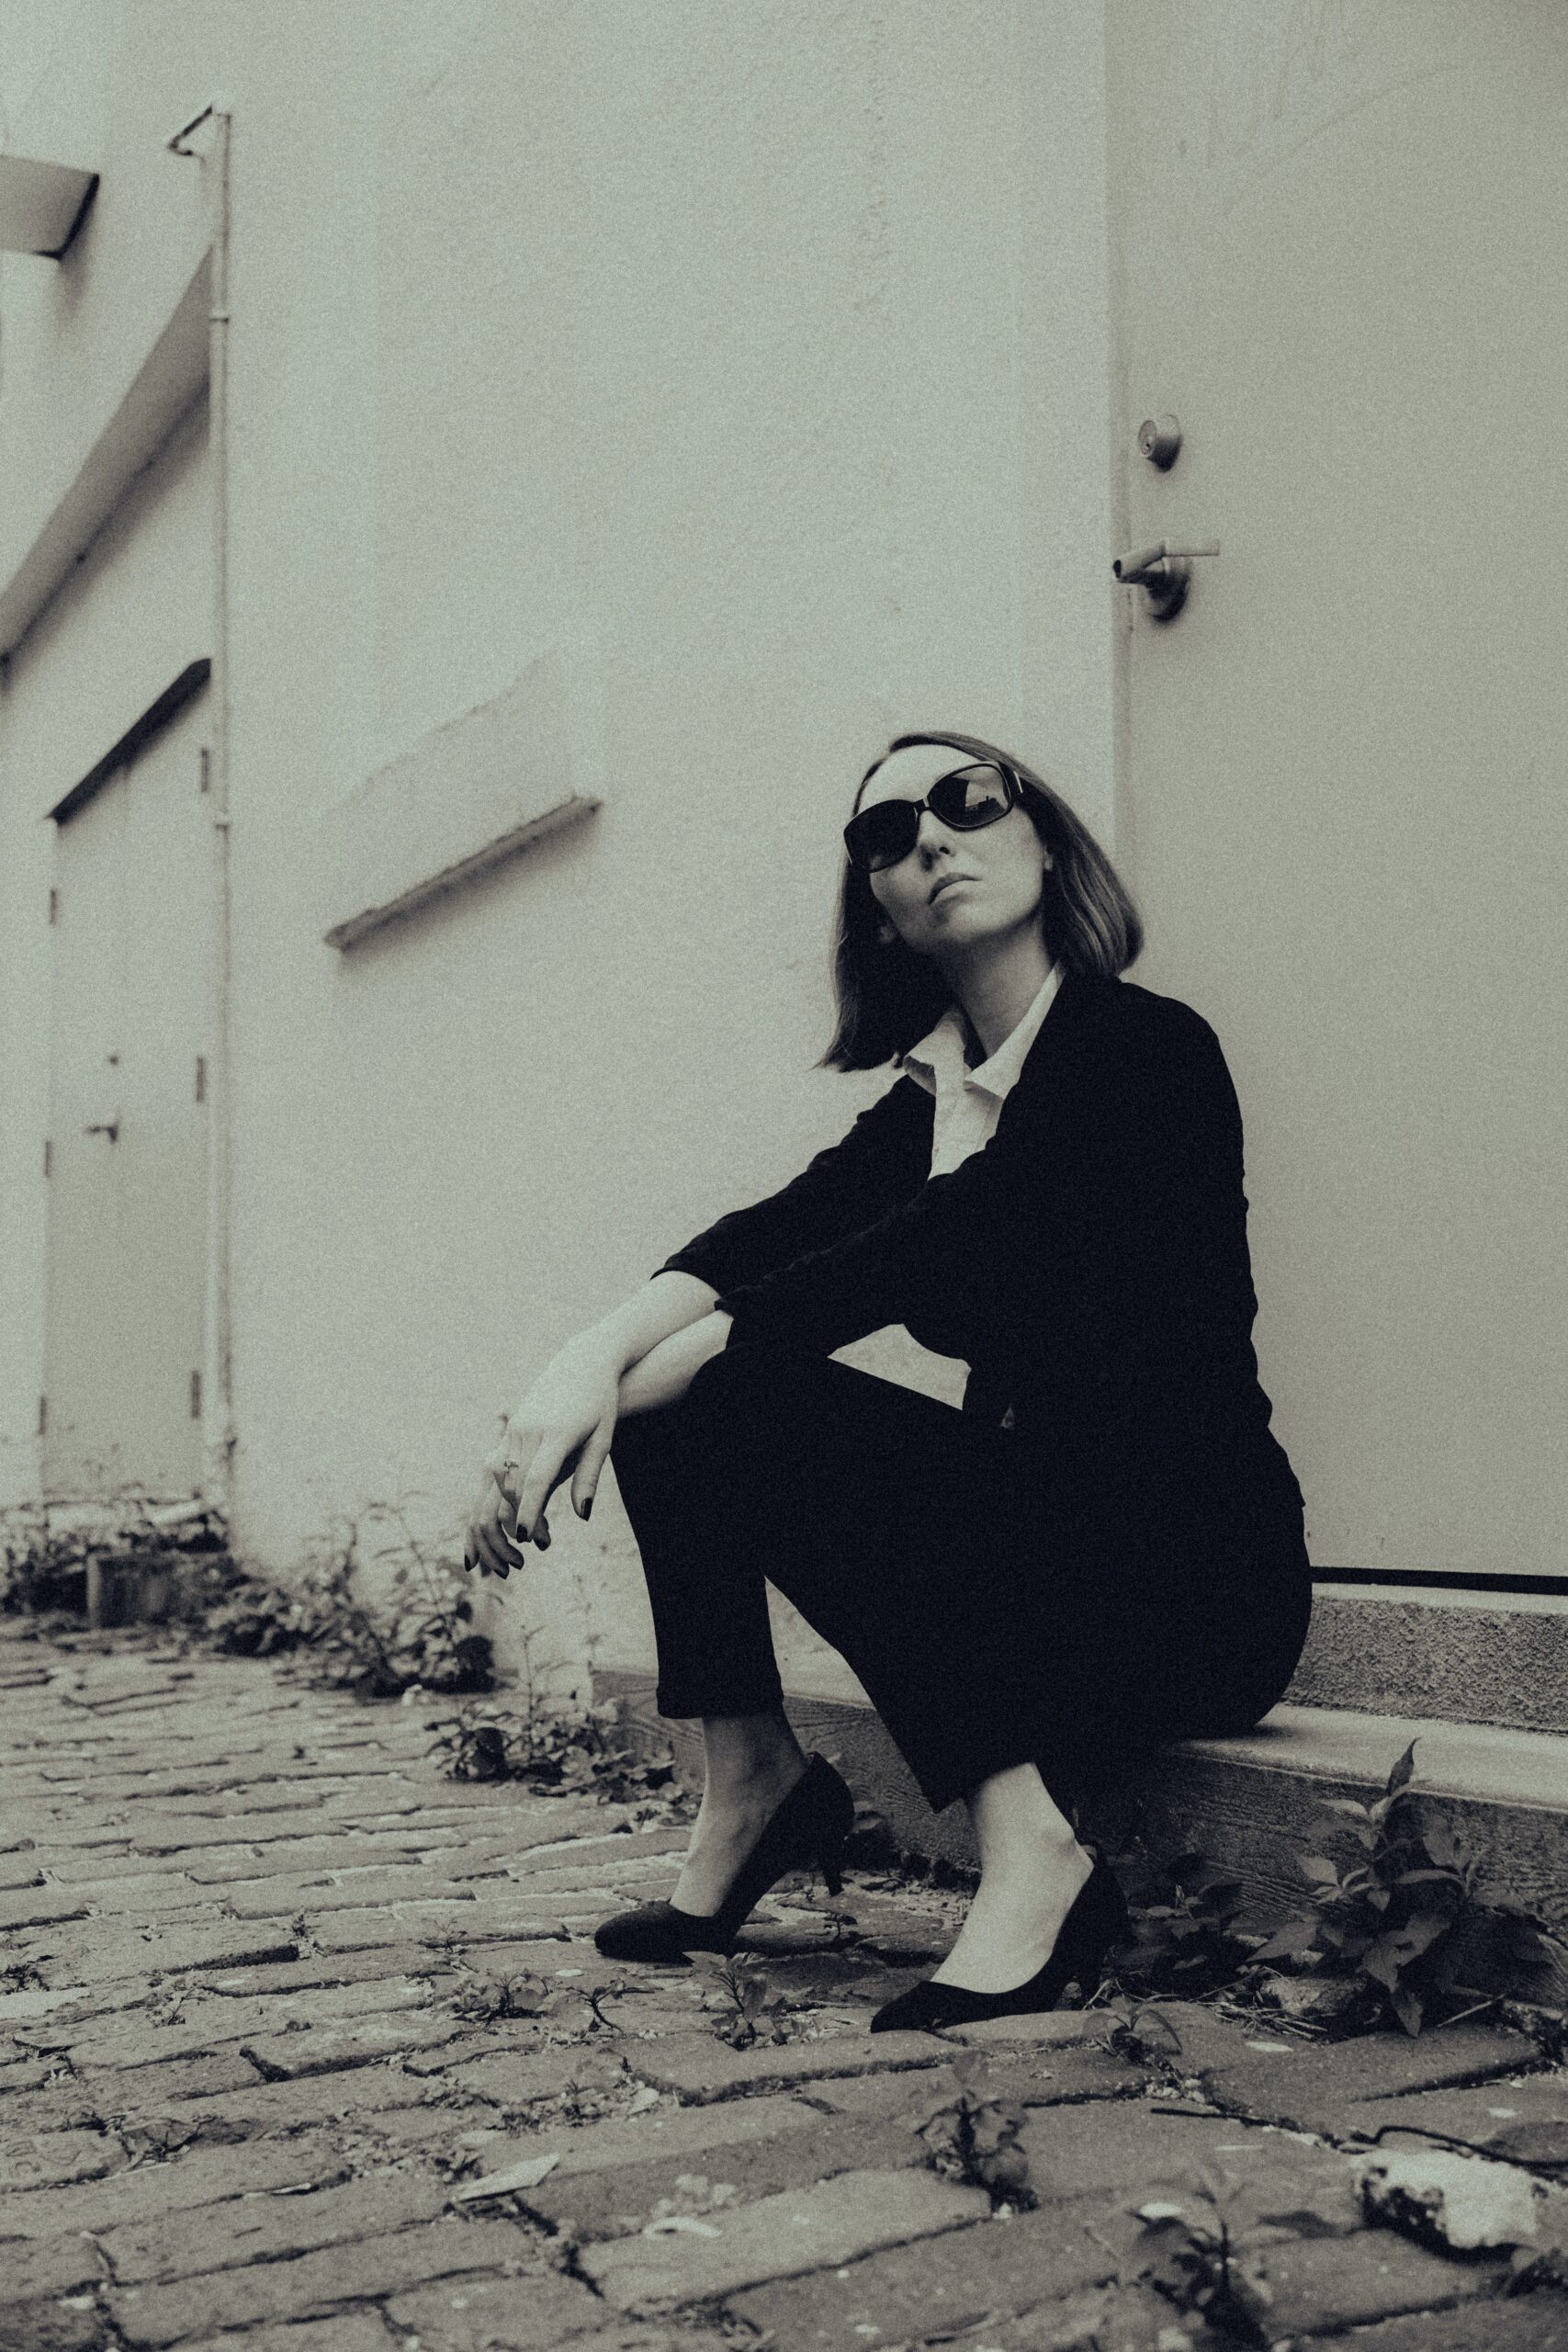 A woman wearing dark sunglasses, a business suit, and high heels sits outside on a concrete step.